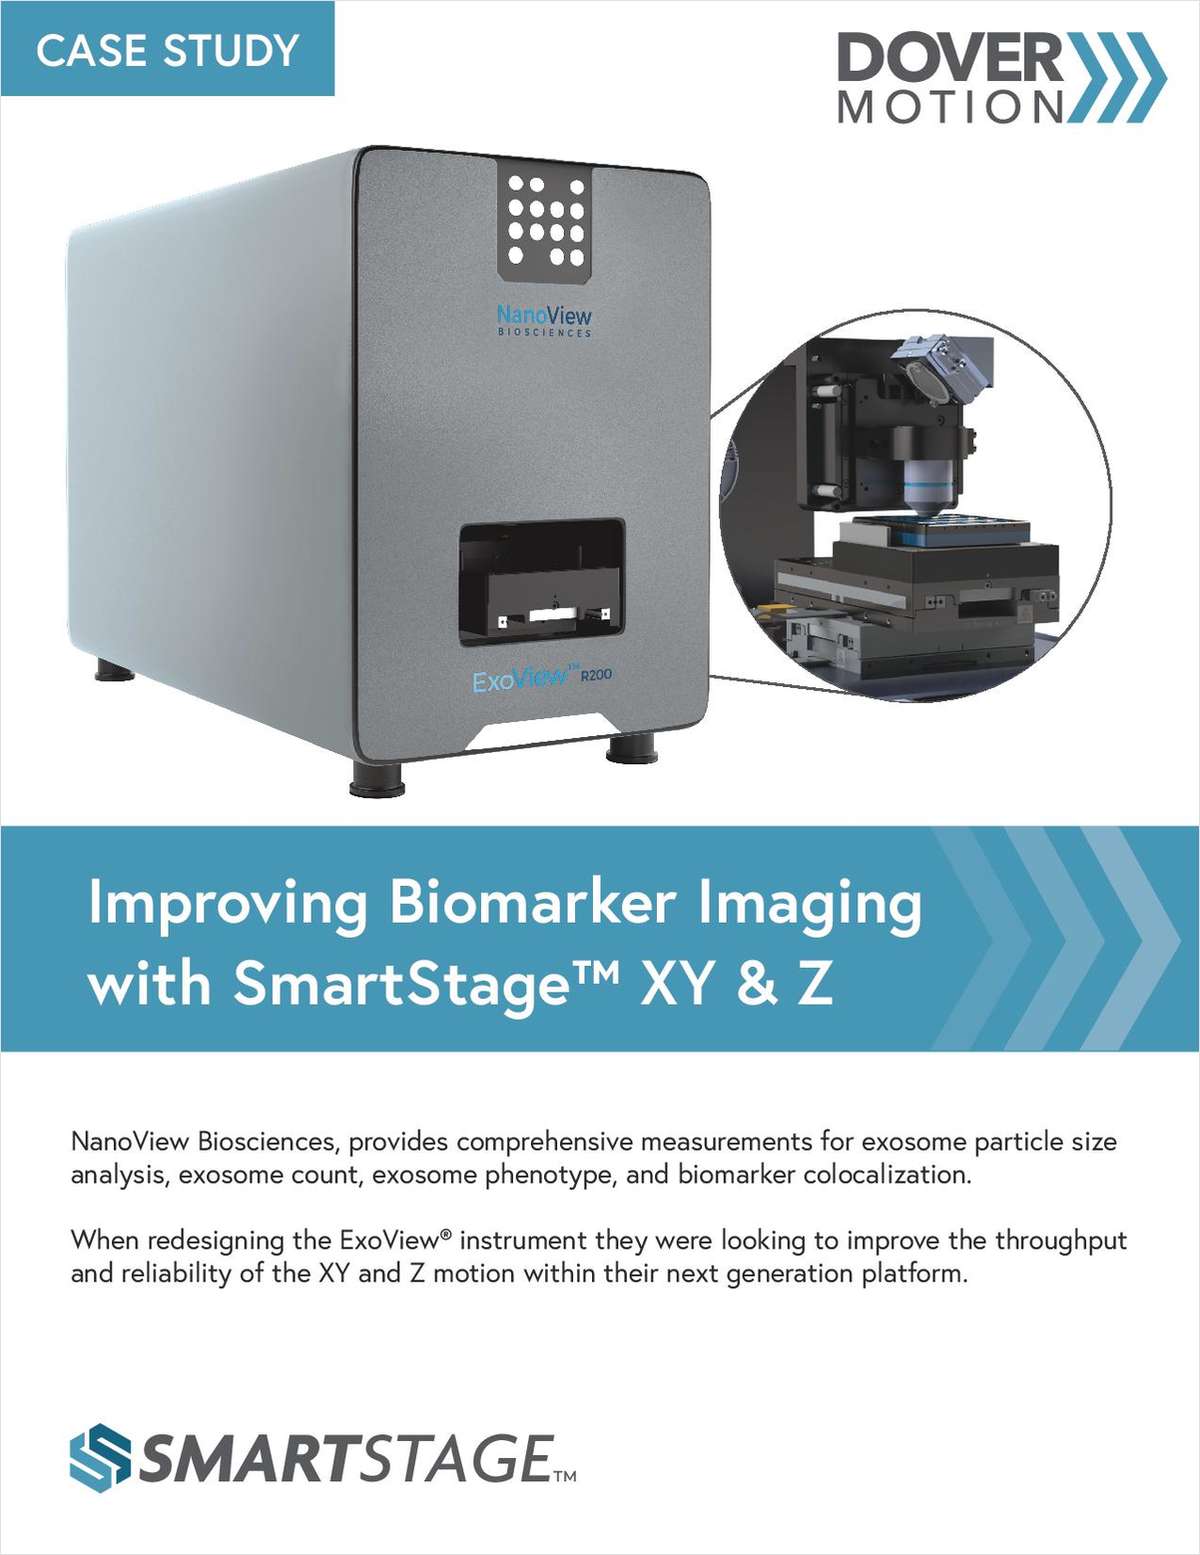 Improving Biomarker Imaging with SmartStage X, Y, and Z